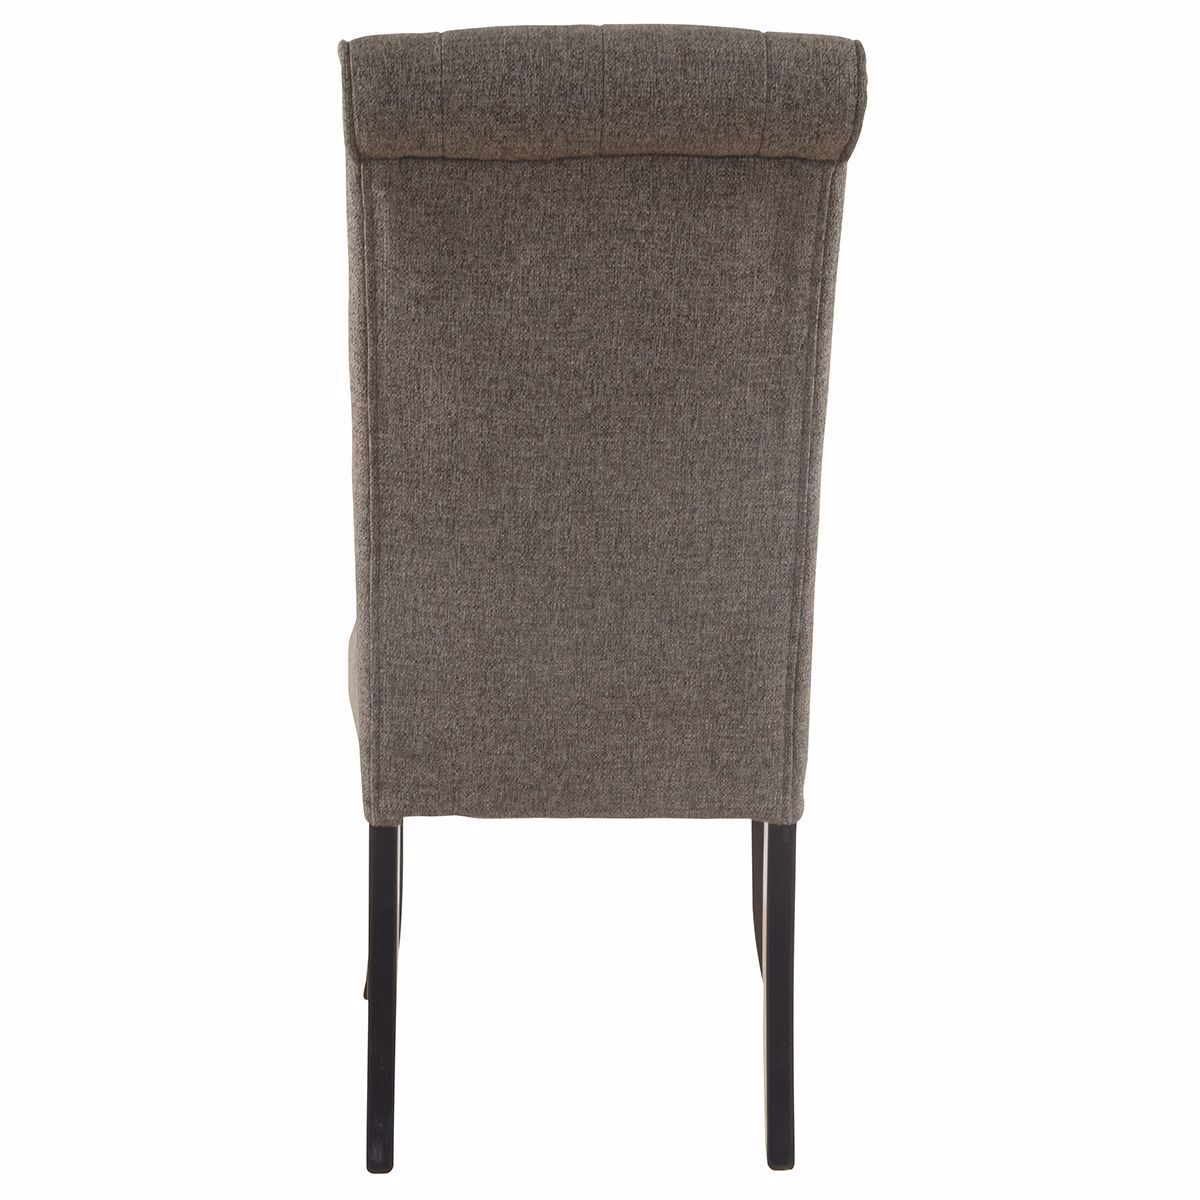 Picture of Emma Gray Upholstered Side Chair